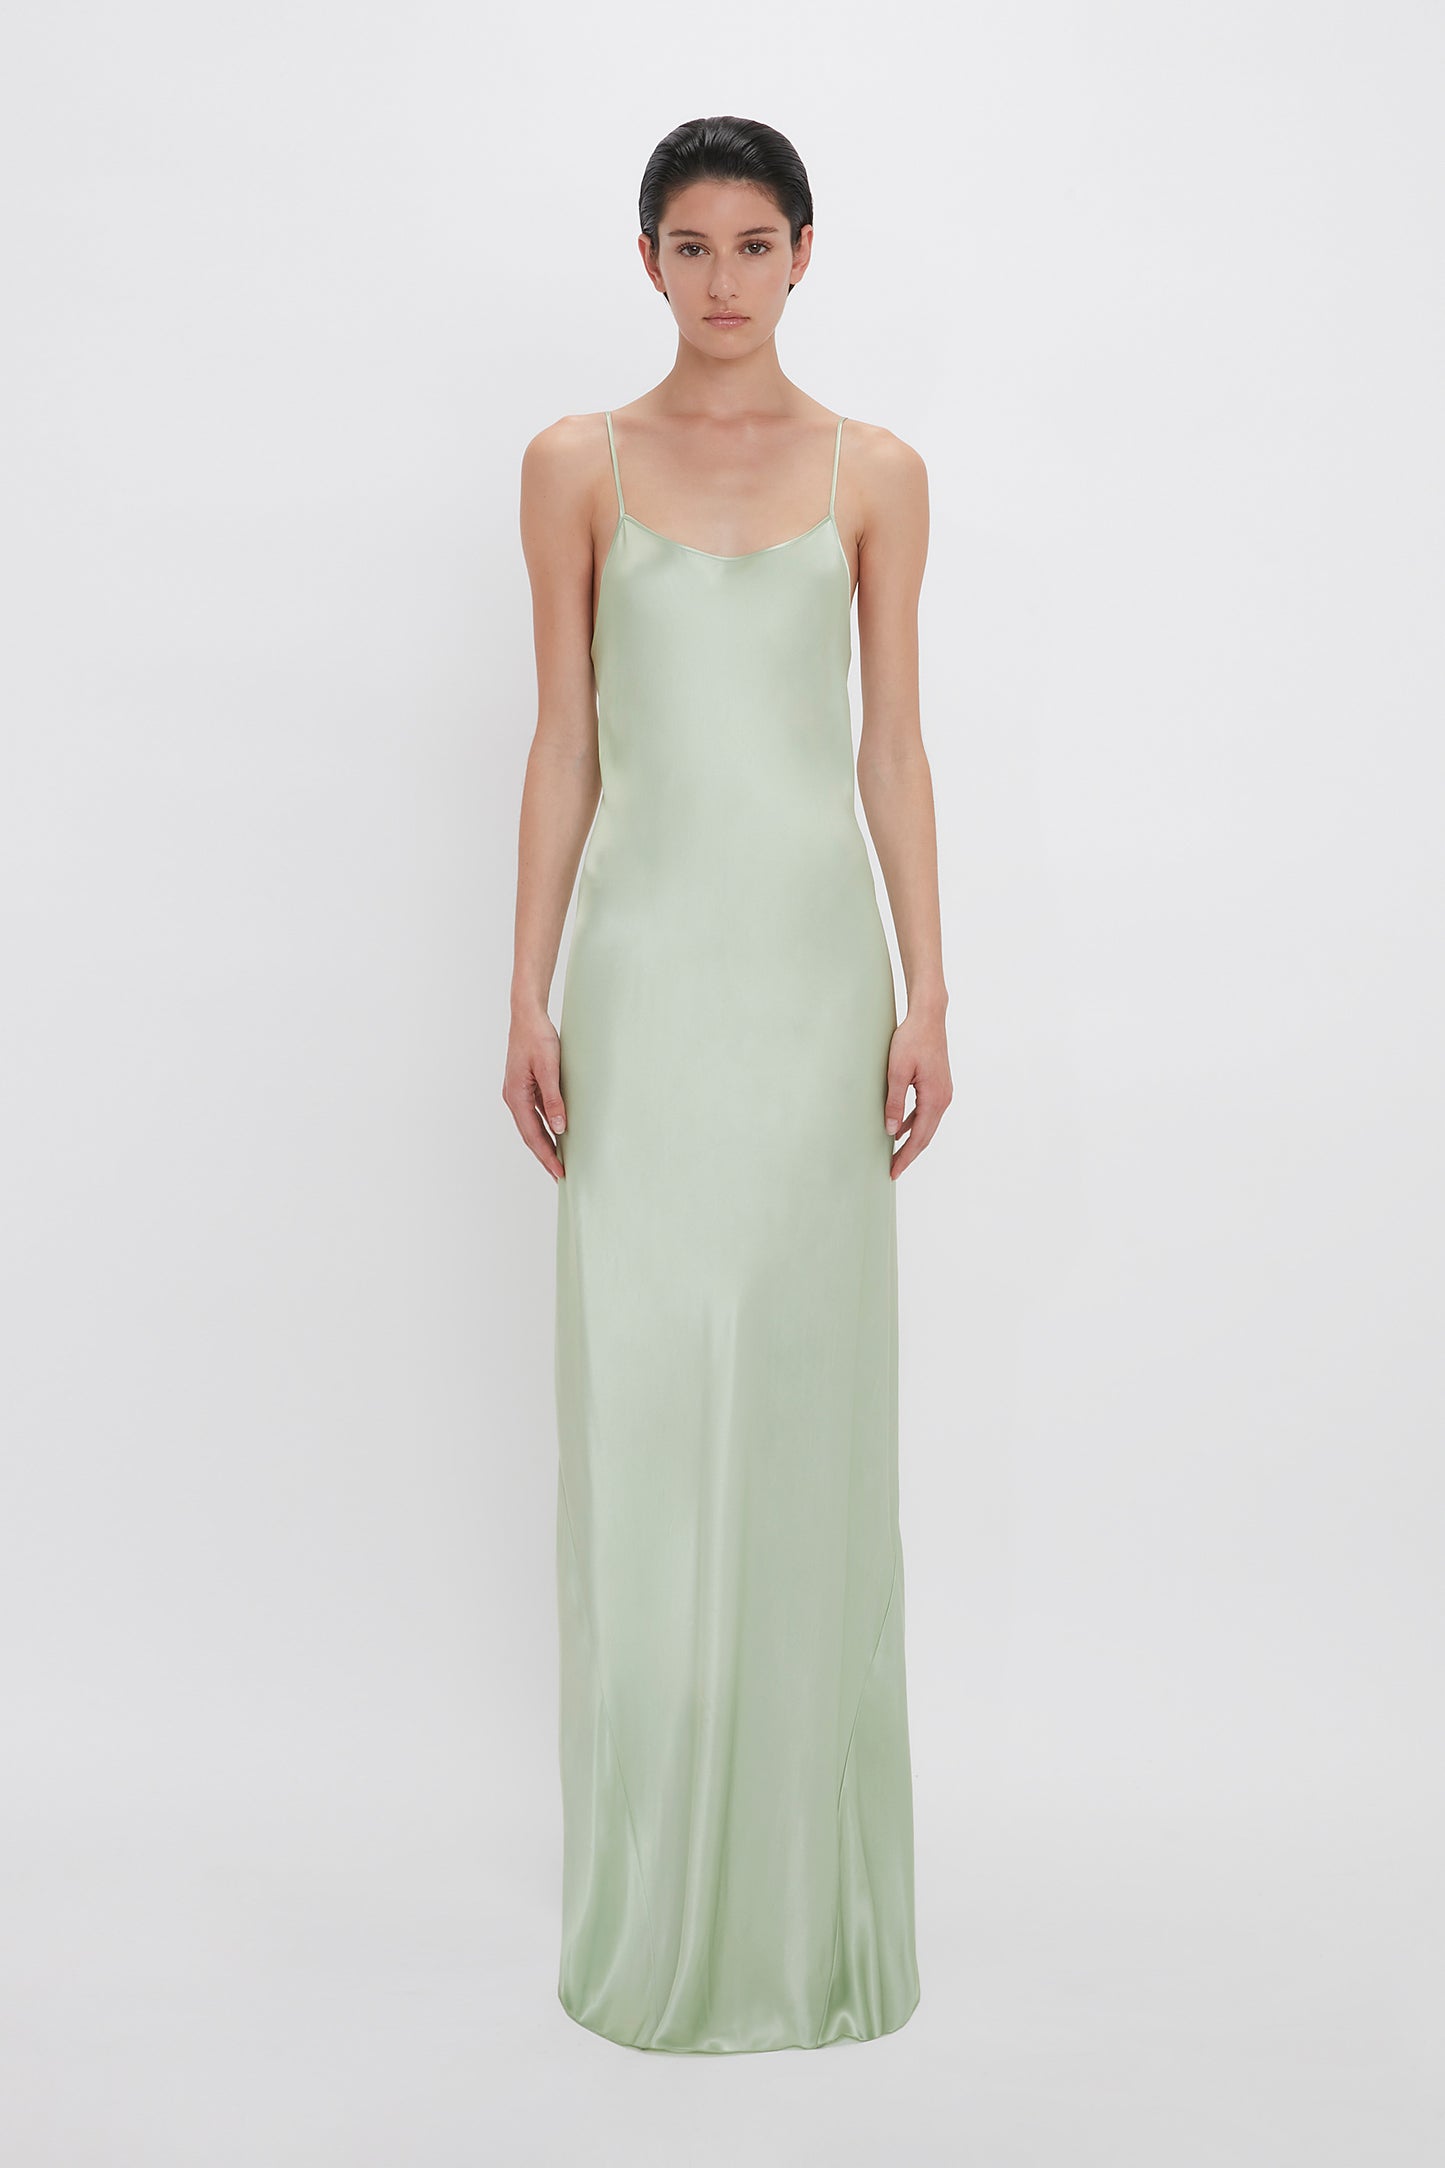 A woman in a Victoria Beckham Exclusive Low Back Cami Floor-Length Dress In Jade stands against a white background, looking directly at the camera.